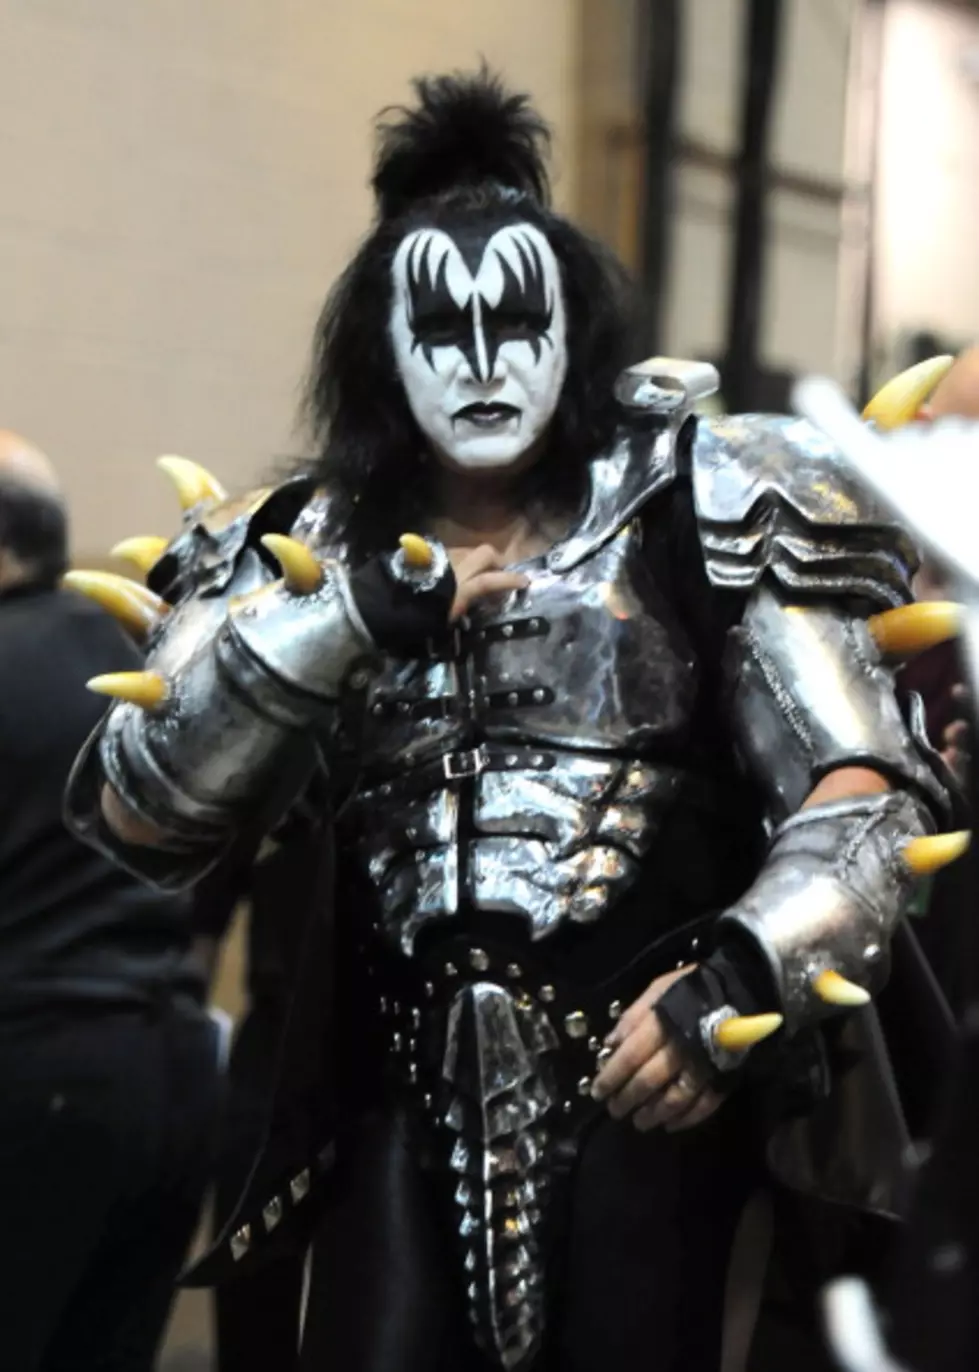 Gene Simmons to Sing National Anthem Tonight for NFL Game + News on KISS’s New Album